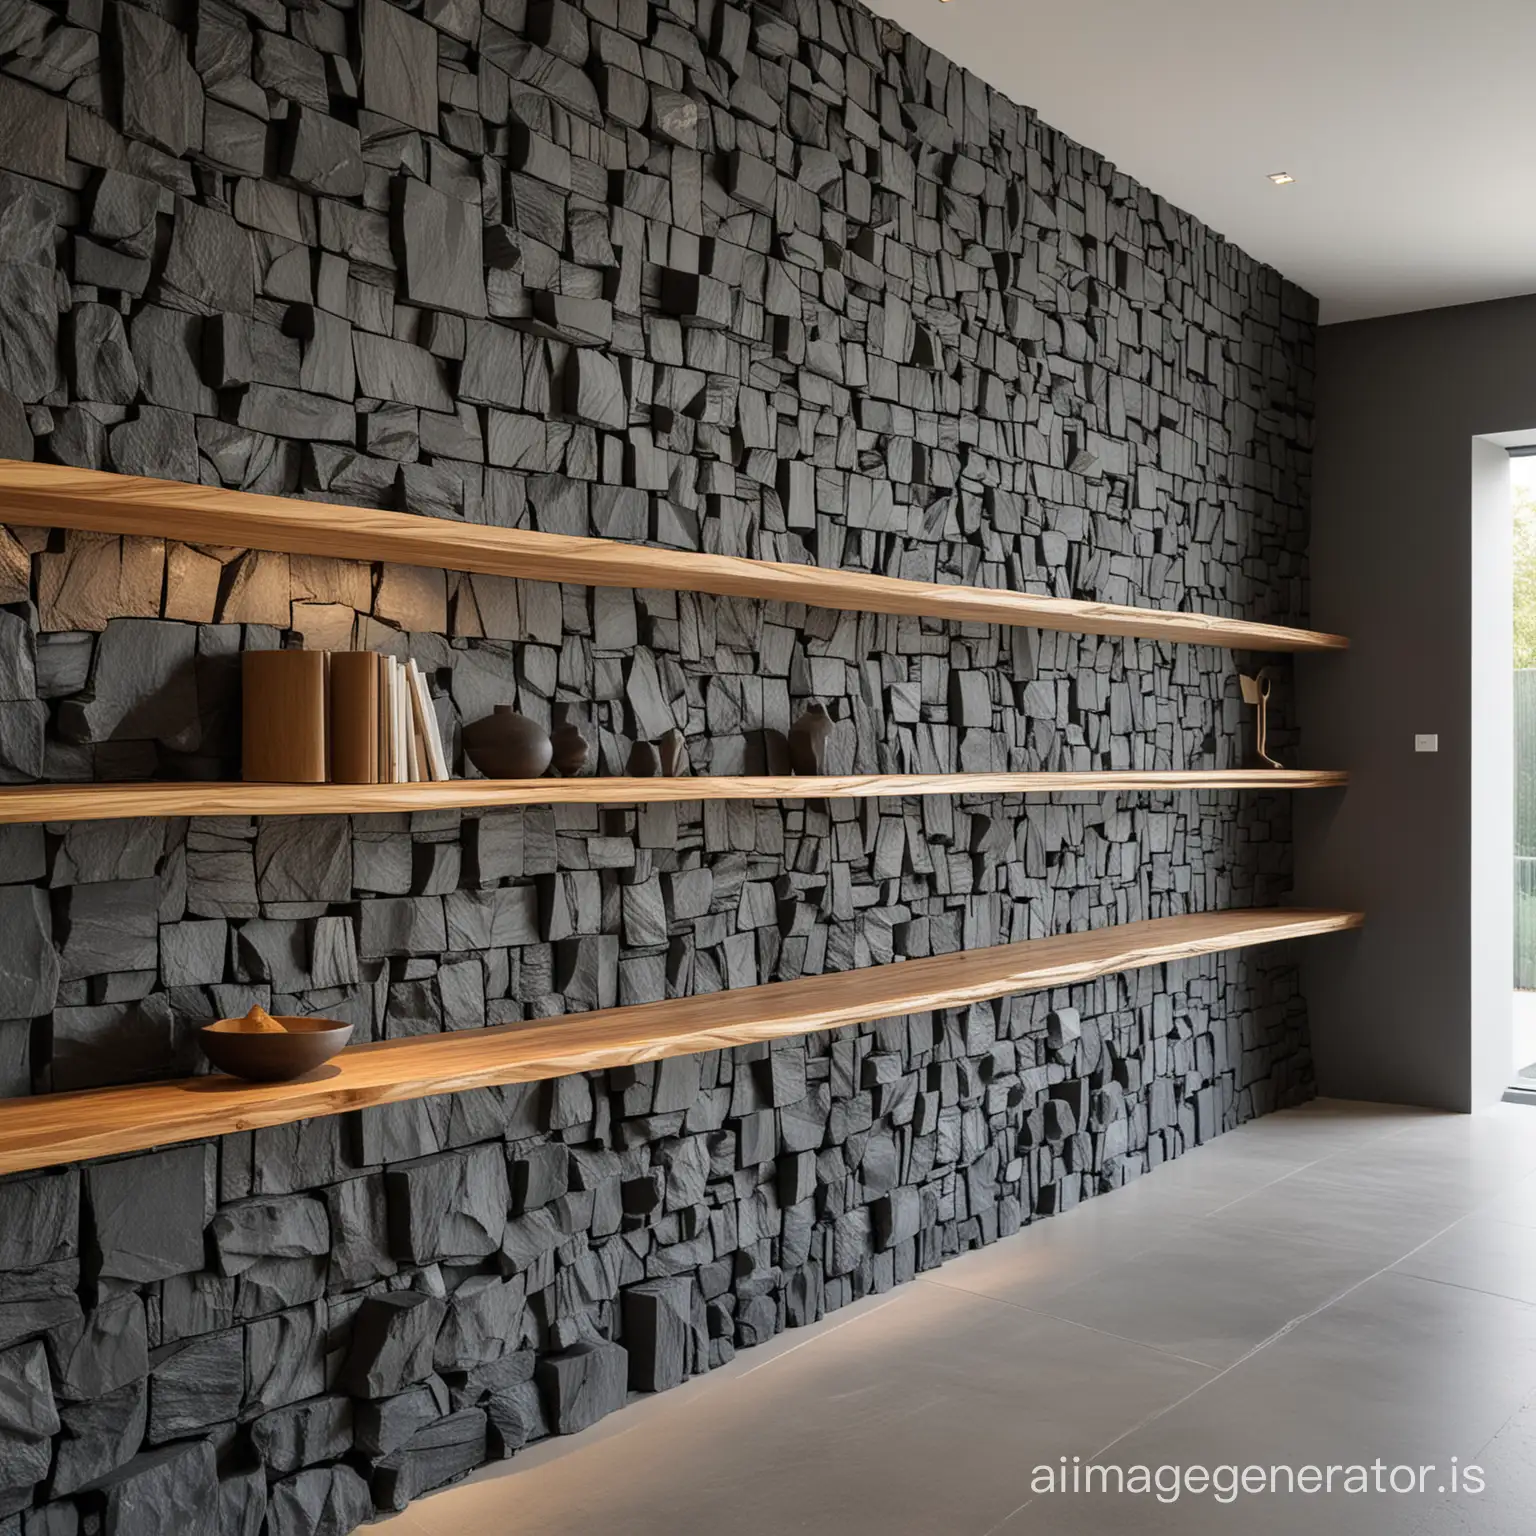 Creative and functional wooden bookcase coving an entire cut basalt stone wall